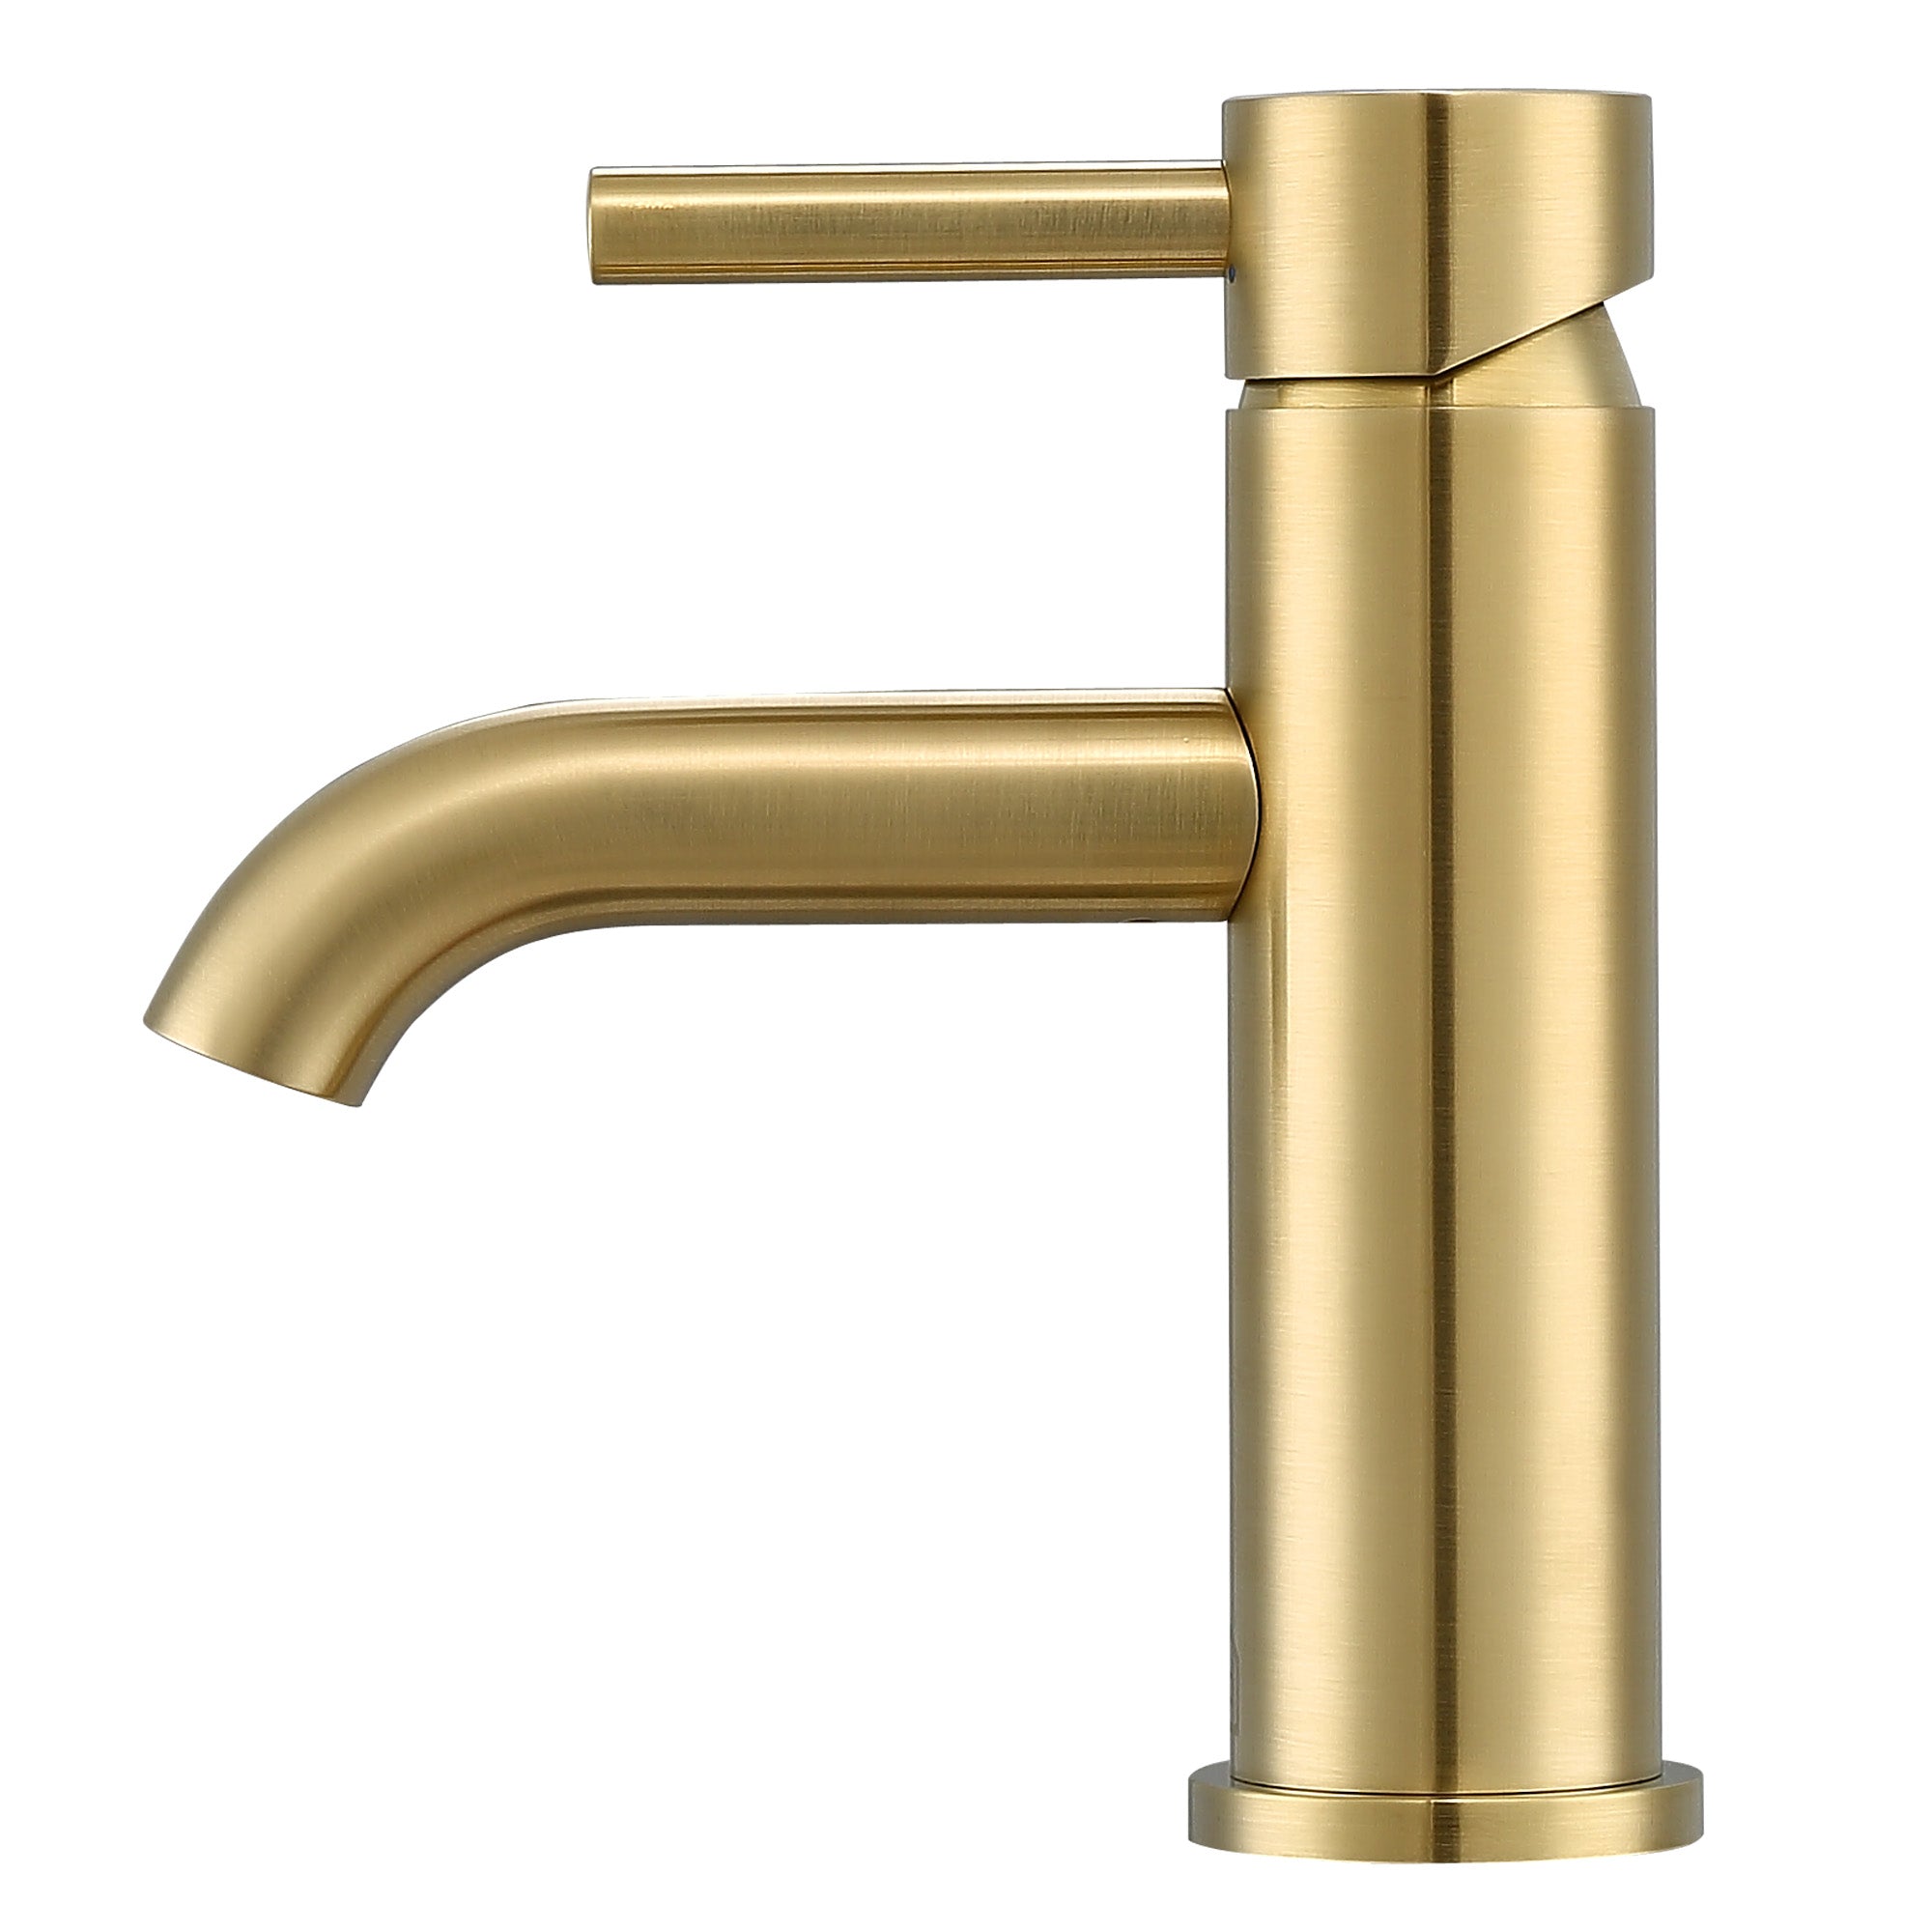 Ancona Valencia Single Handle 1-Hole Bathroom Faucet in Brushed Champagne Gold